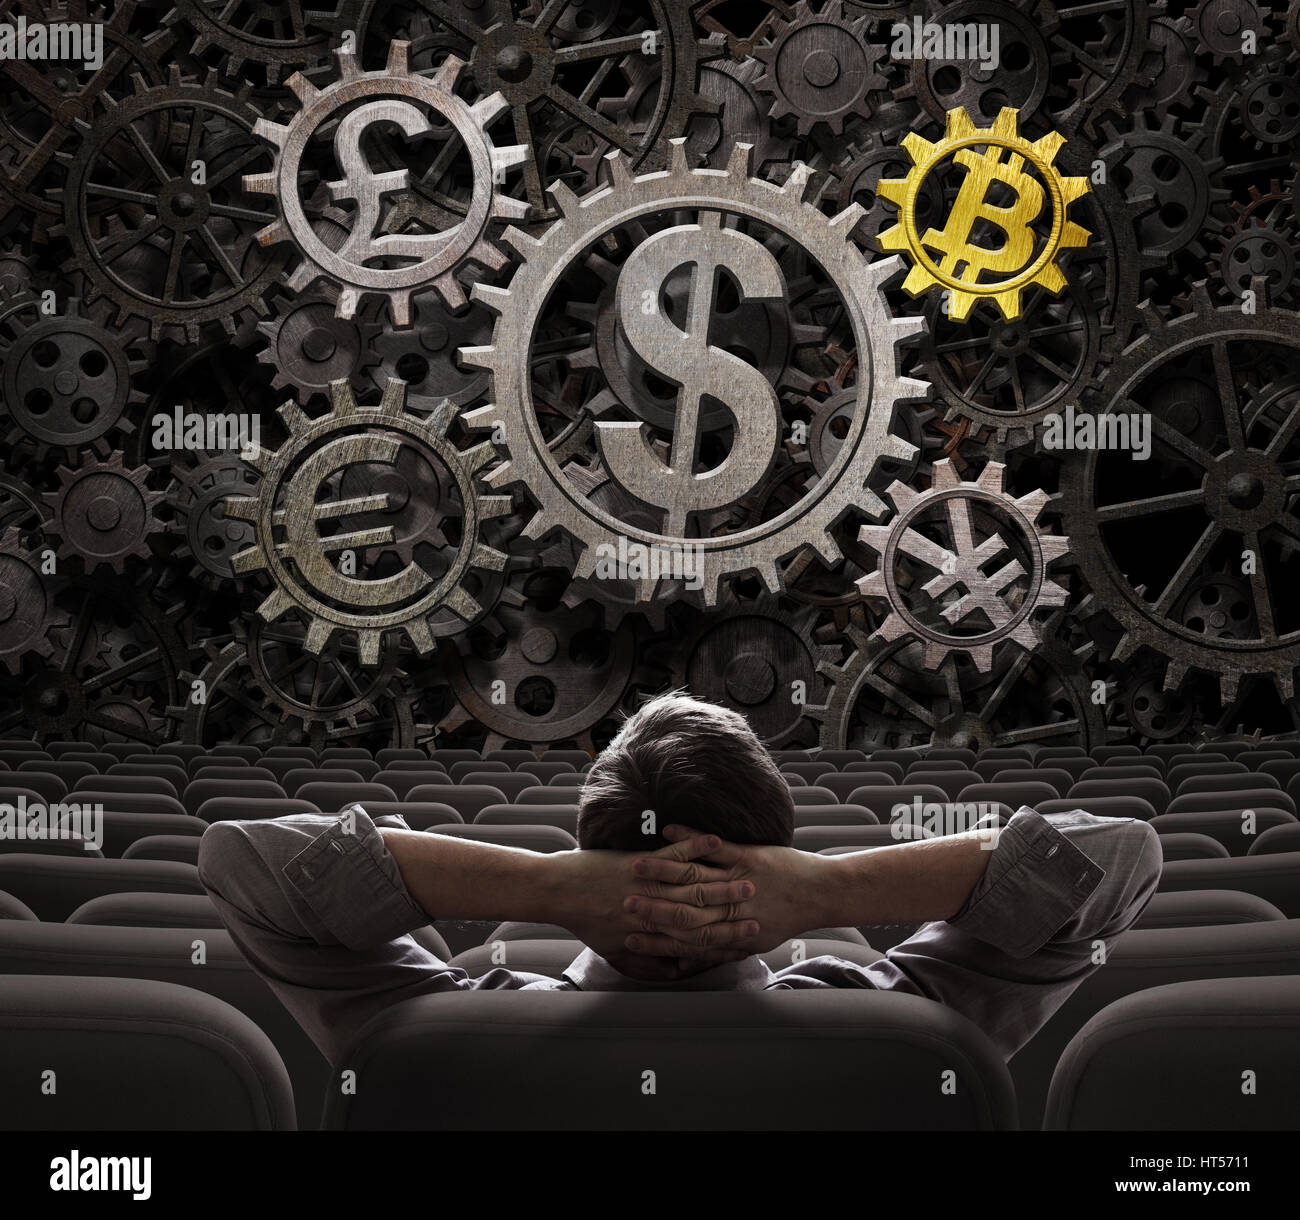 trader or investor looking on main currencies working gears including bitcoin 3d illustration Stock Photo